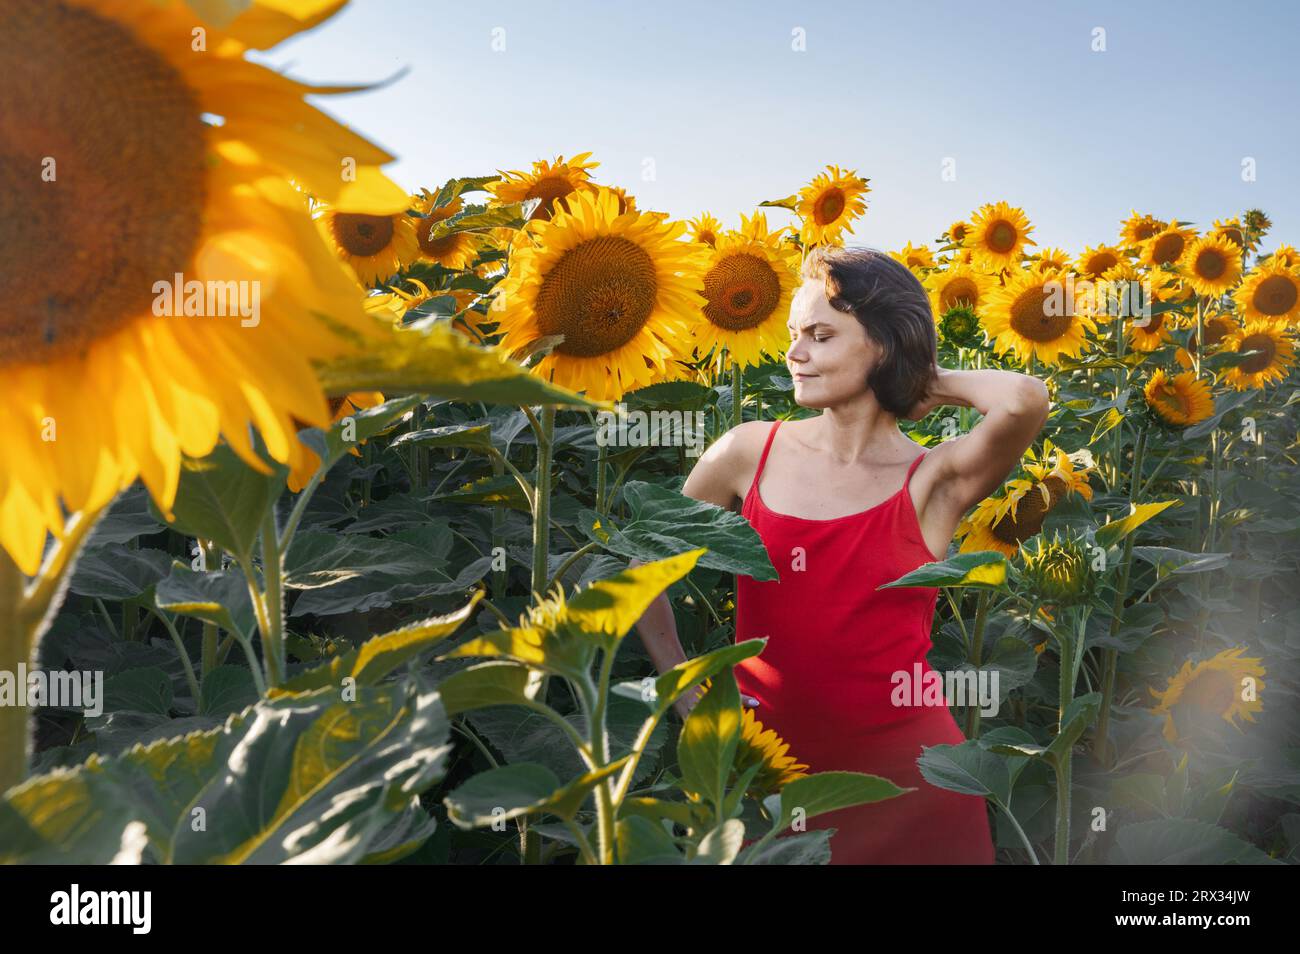 Beautiful young woman with sunflowers enjoying nature and laughing on summer sunflower field. Woman holding sunflowers. Sunflare, sunbeams, glow sun, Stock Photo